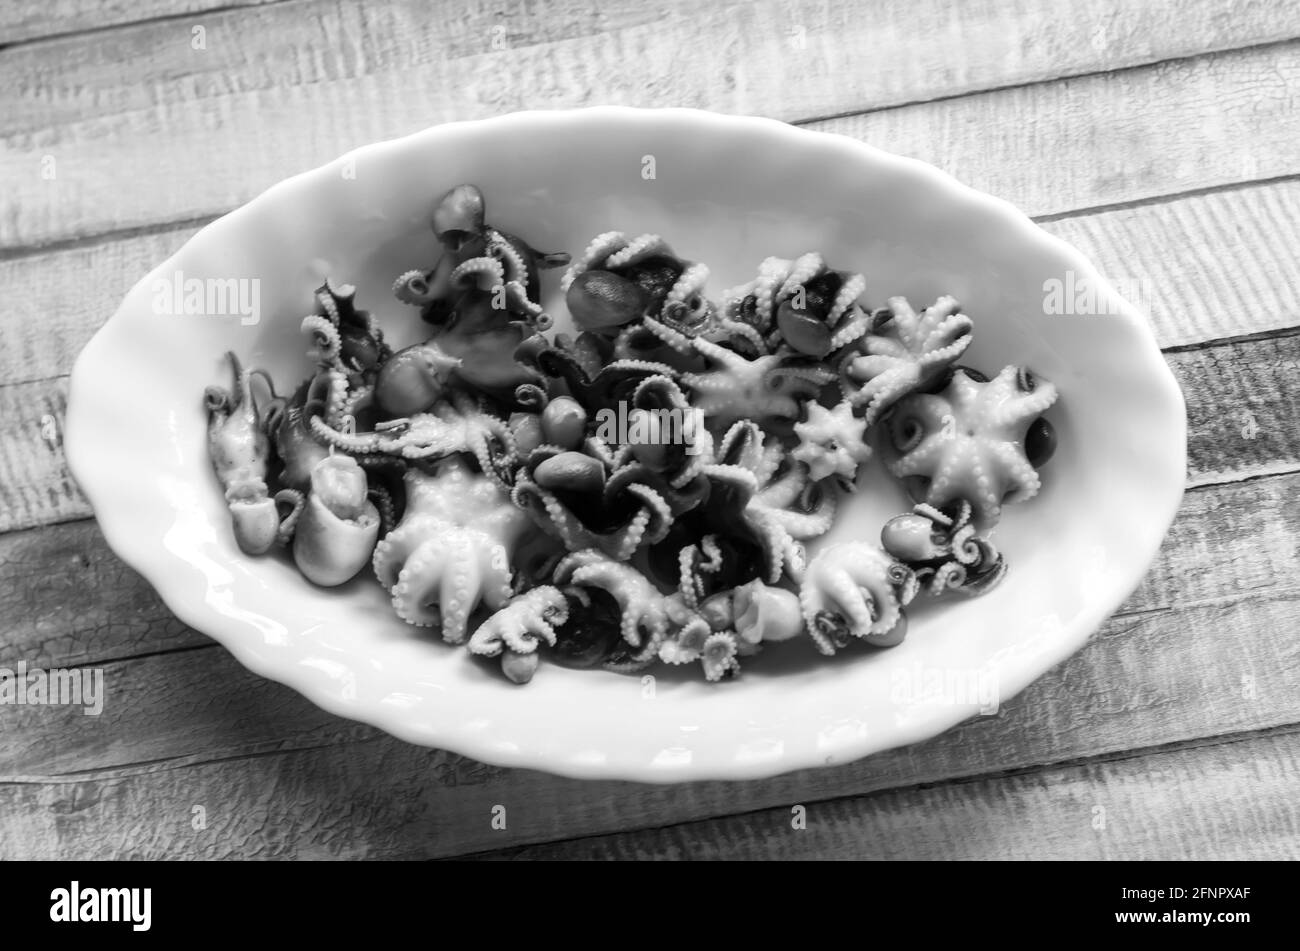 Little octopuses on a plate on a wooden colored background.Seafood healthy food photo. Stock Photo